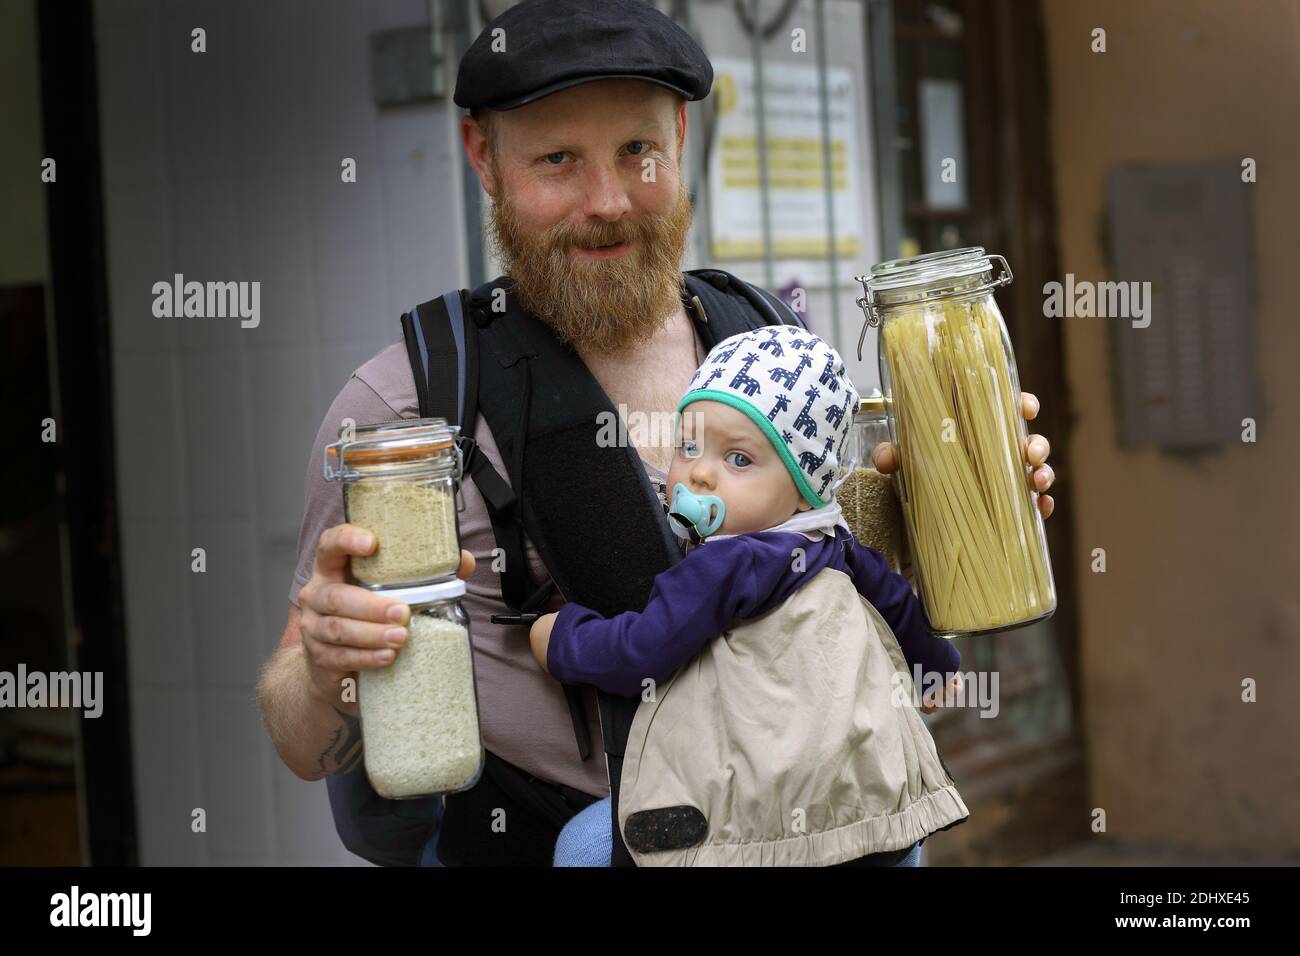 Germany / Berlin / Customers bring their own containers and fill them with anything from olive oil to washing up liquid, at Original Unverpackt,. Stock Photo